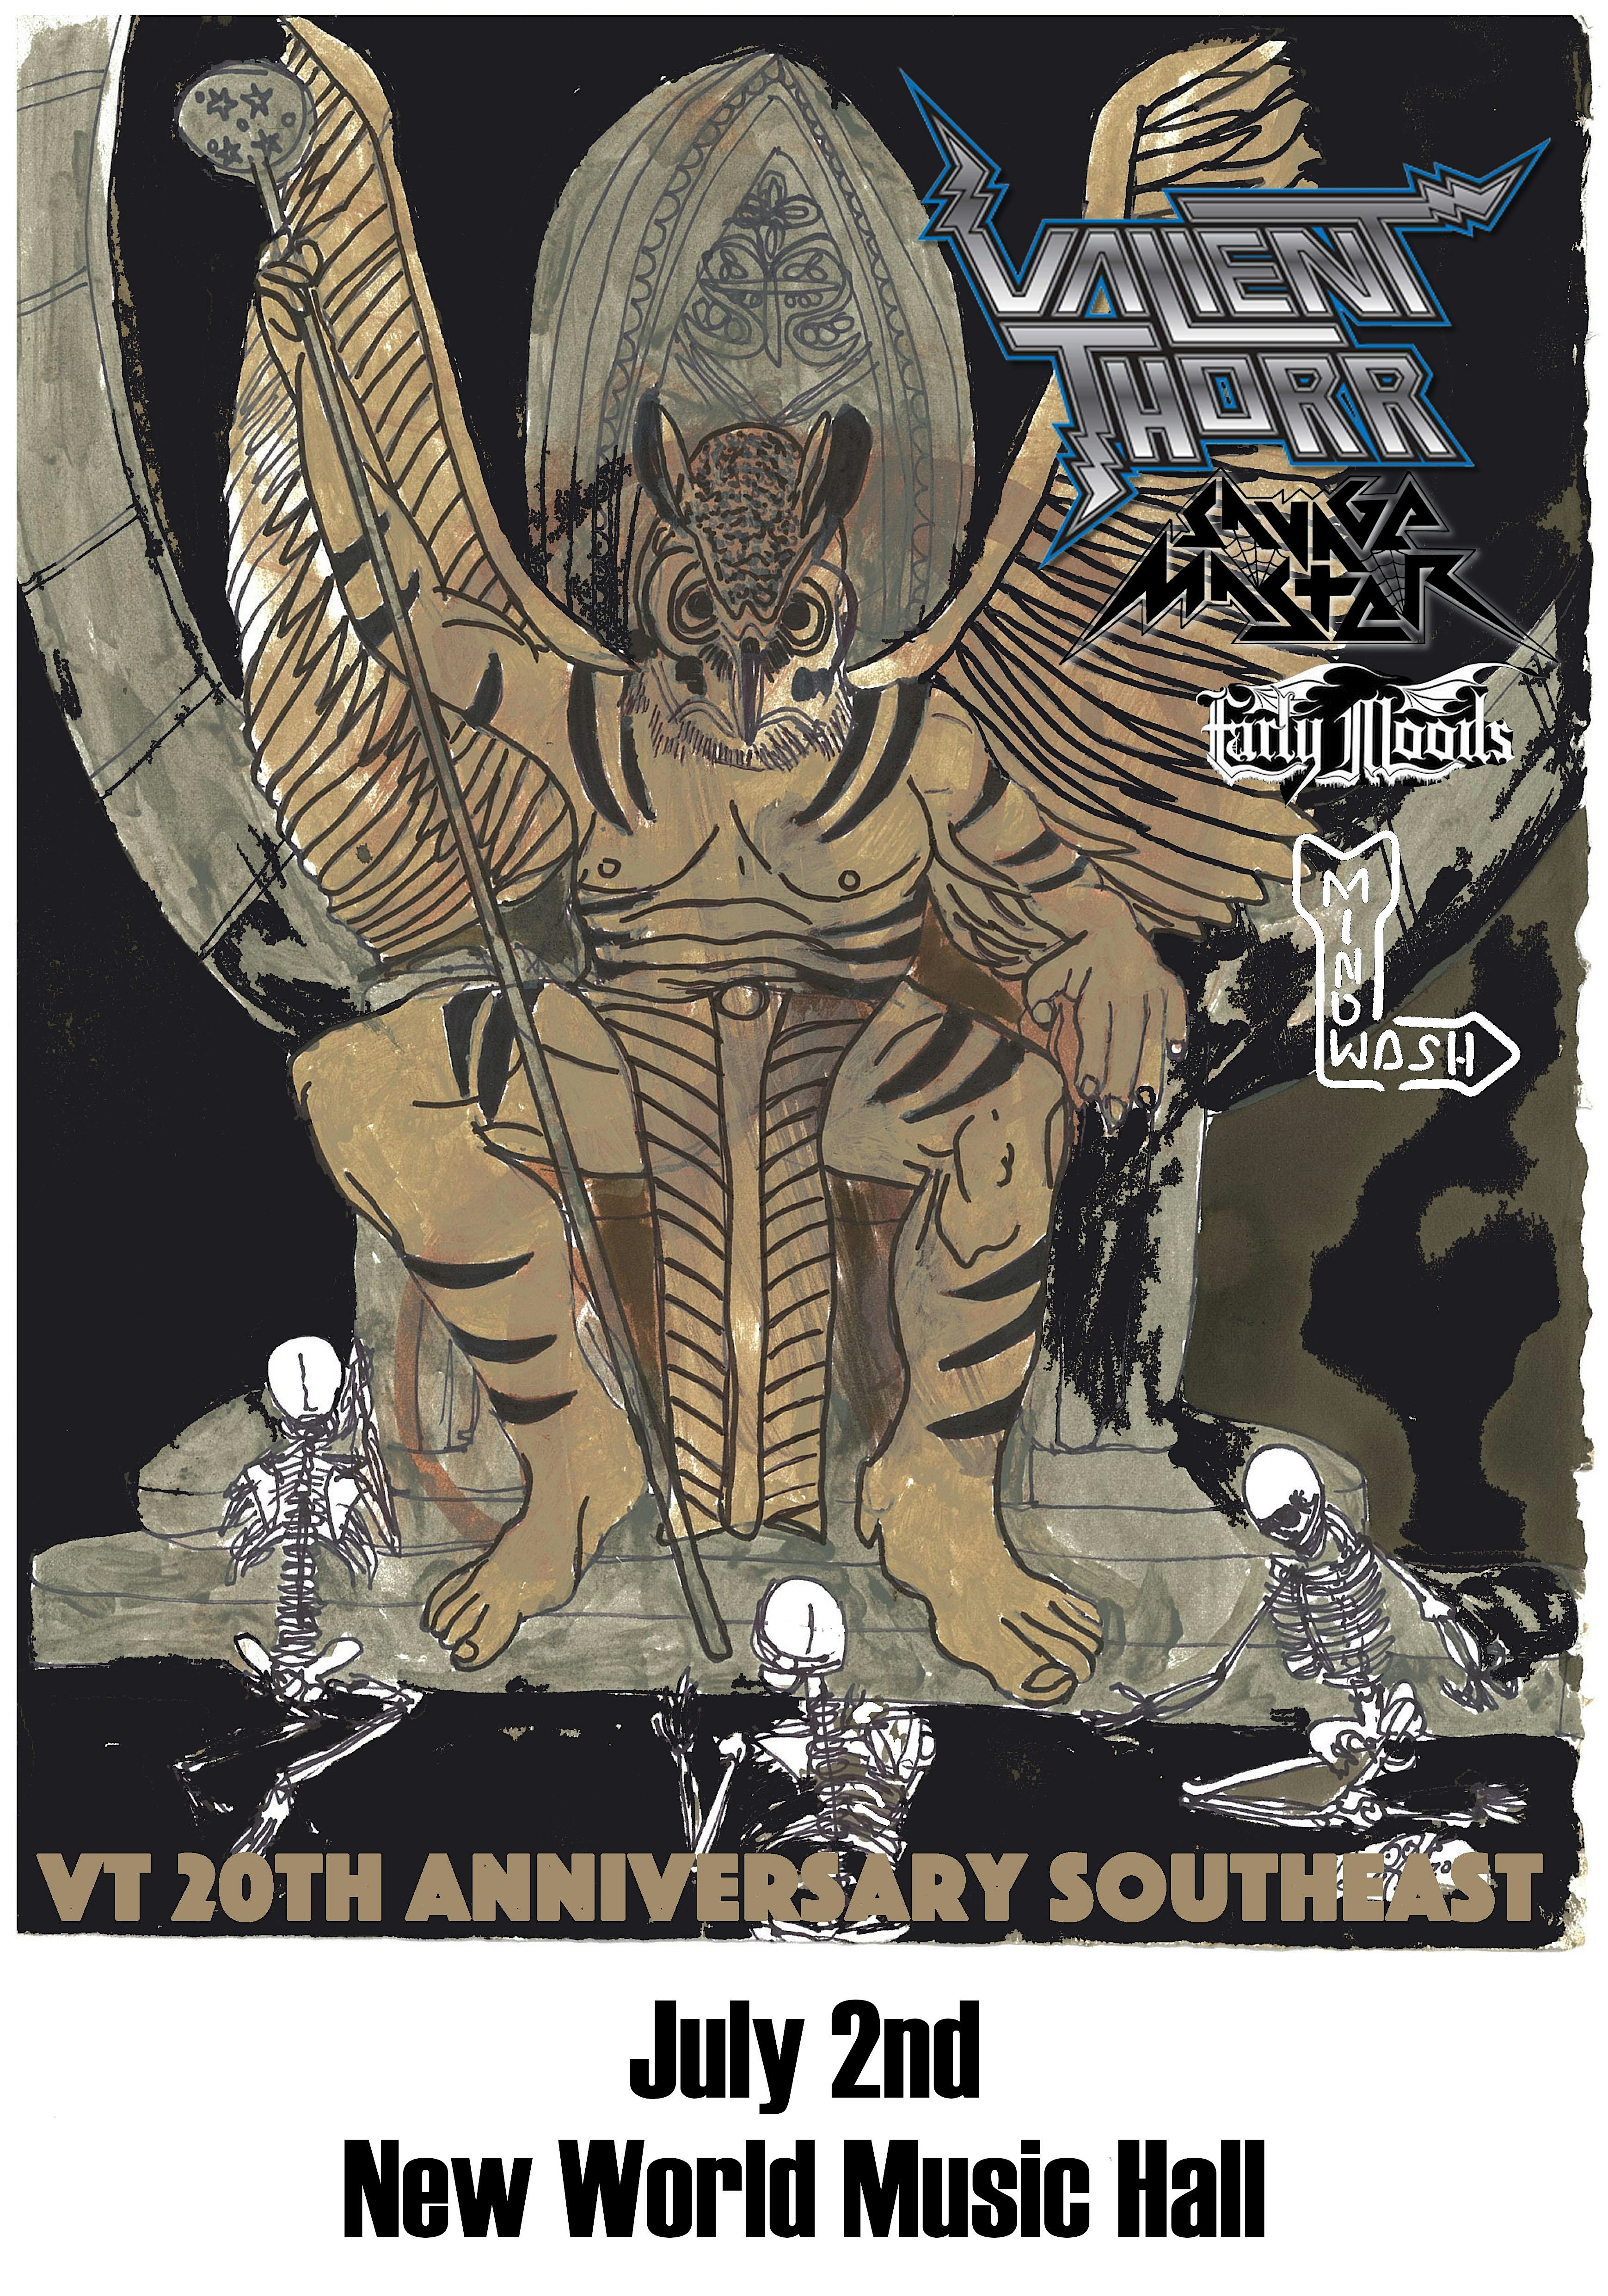 Valient Thorr 20th Anniversary Tour with Savage Master, Early Moods, and Mindwash at New World Music Hall